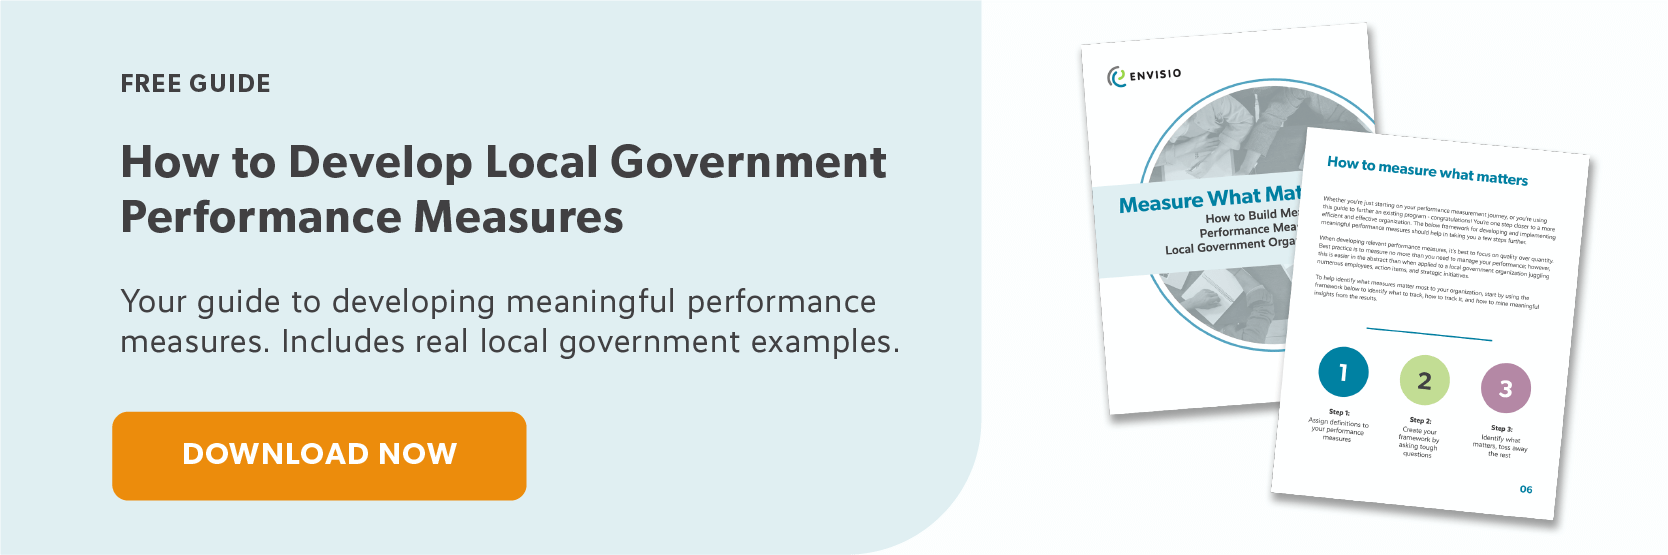 How to Develop Local Government Performance Measures Guide Image